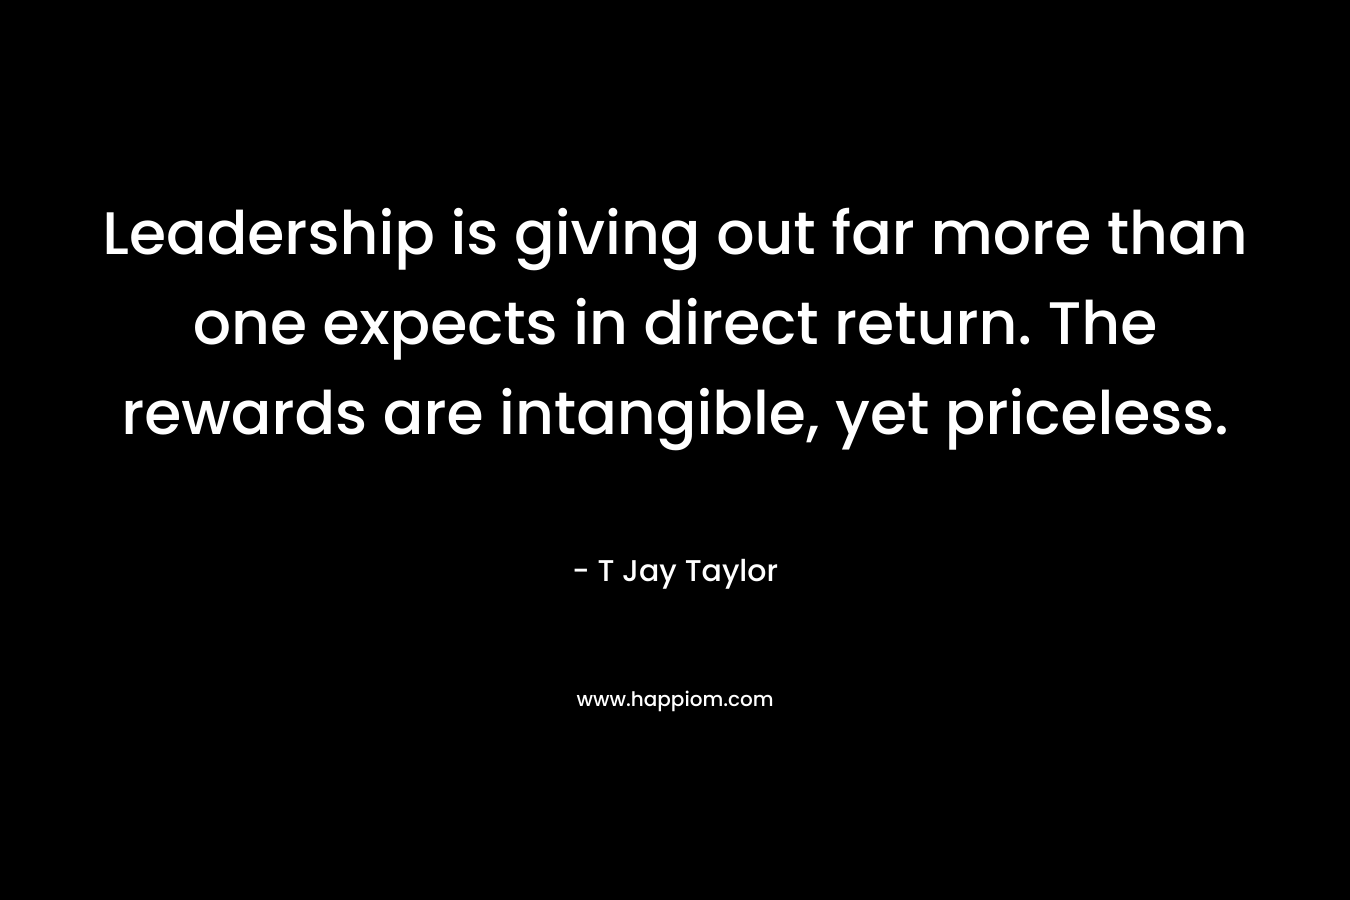 Leadership is giving out far more than one expects in direct return. The rewards are intangible, yet priceless. – T Jay Taylor